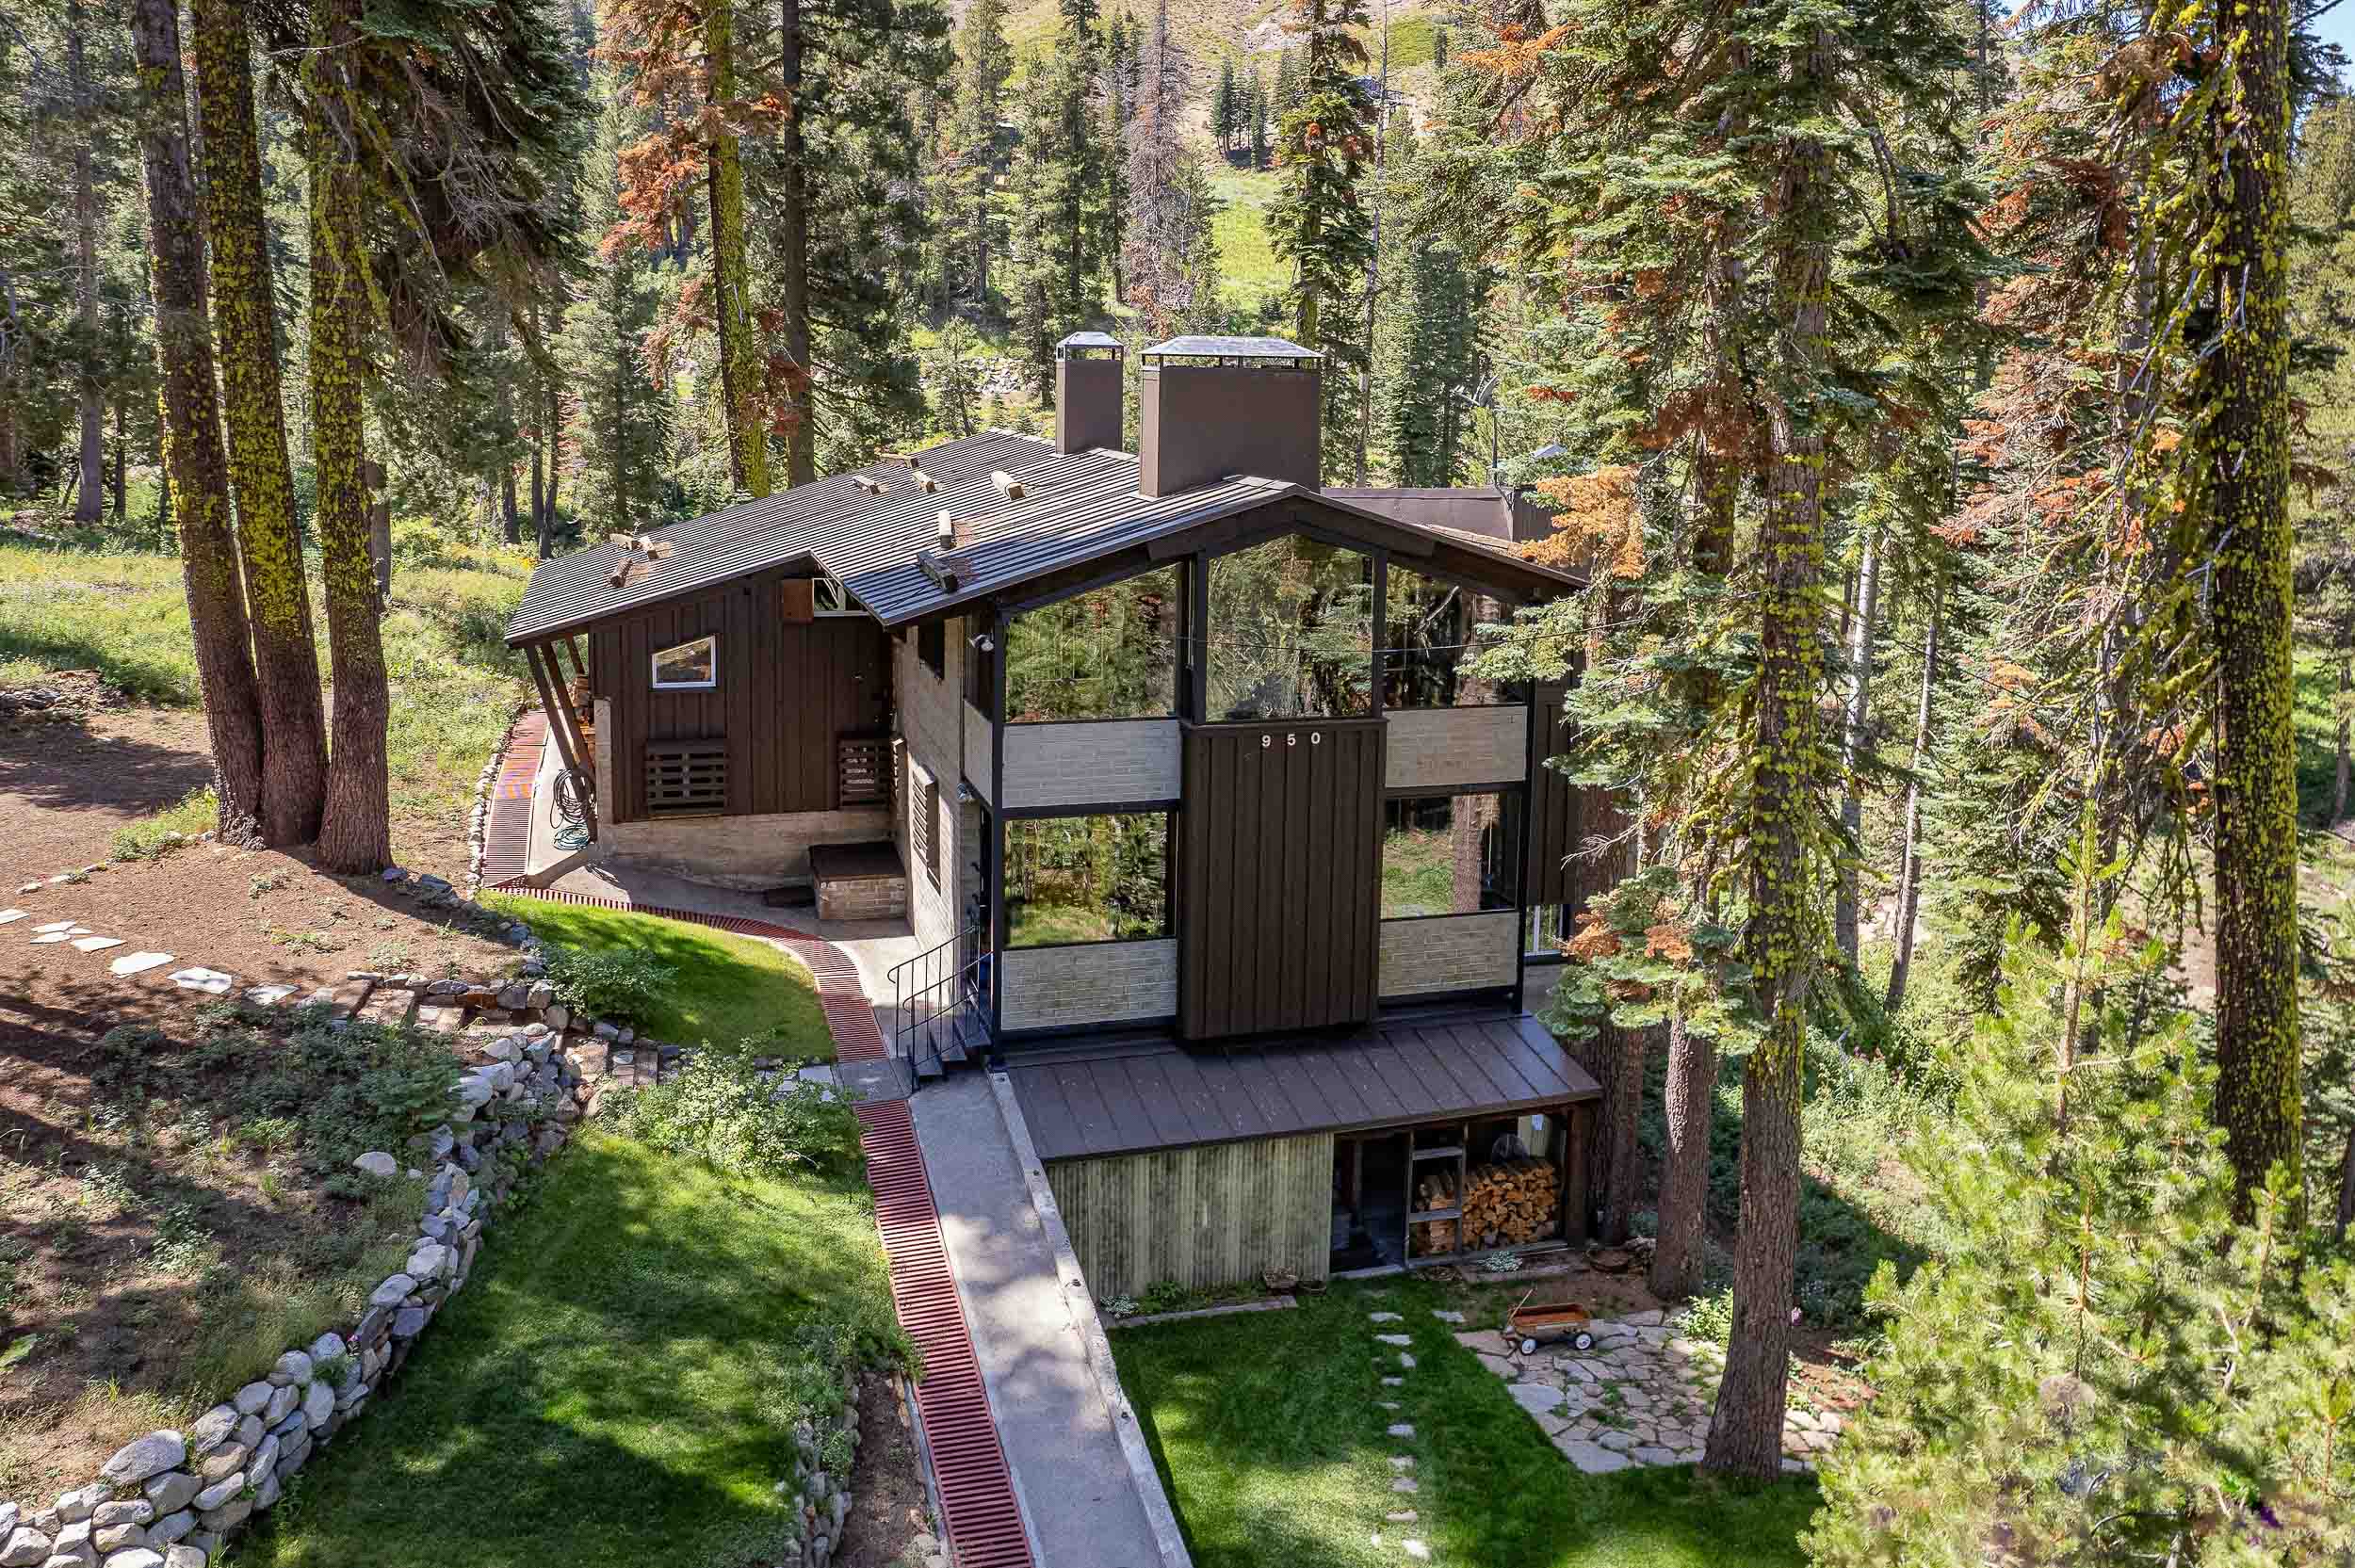 A two-story lodge on a hill surrounded by pine trees.